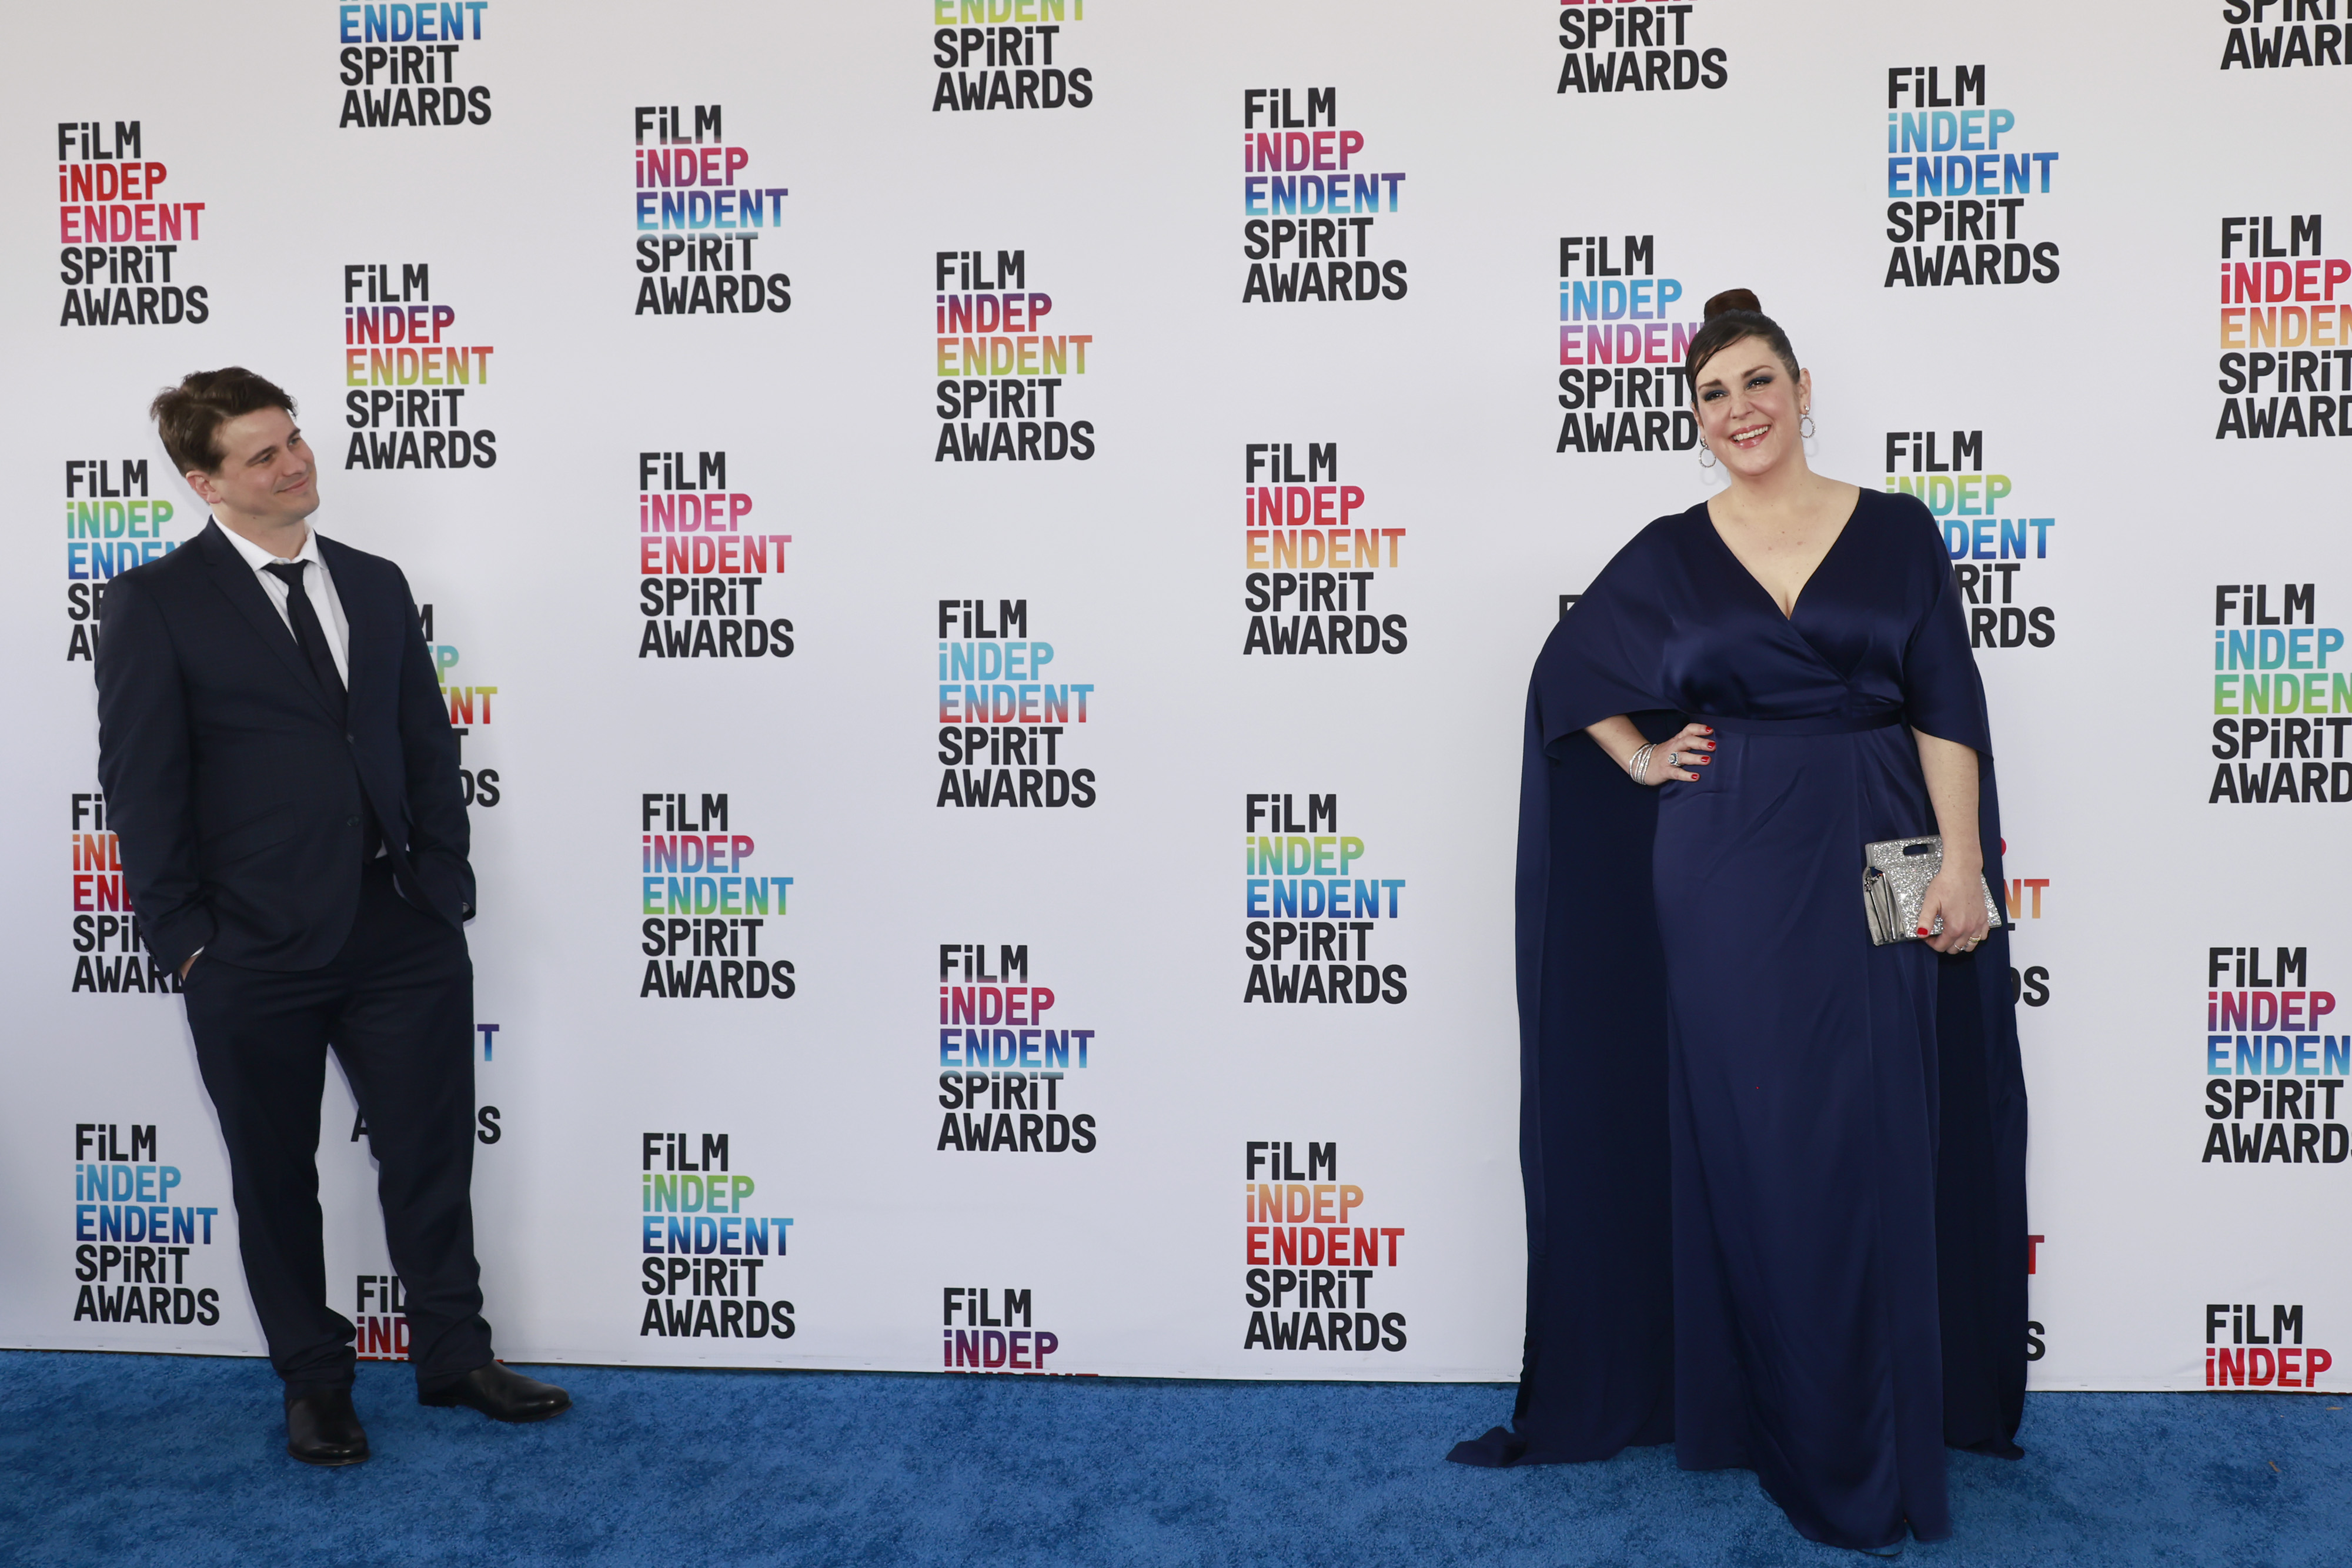 Jason Ritter and Melanie Lynskey at the Film Independent Spirit Awards on March 4, 2023, in Santa Monica, California | Source: Getty Images